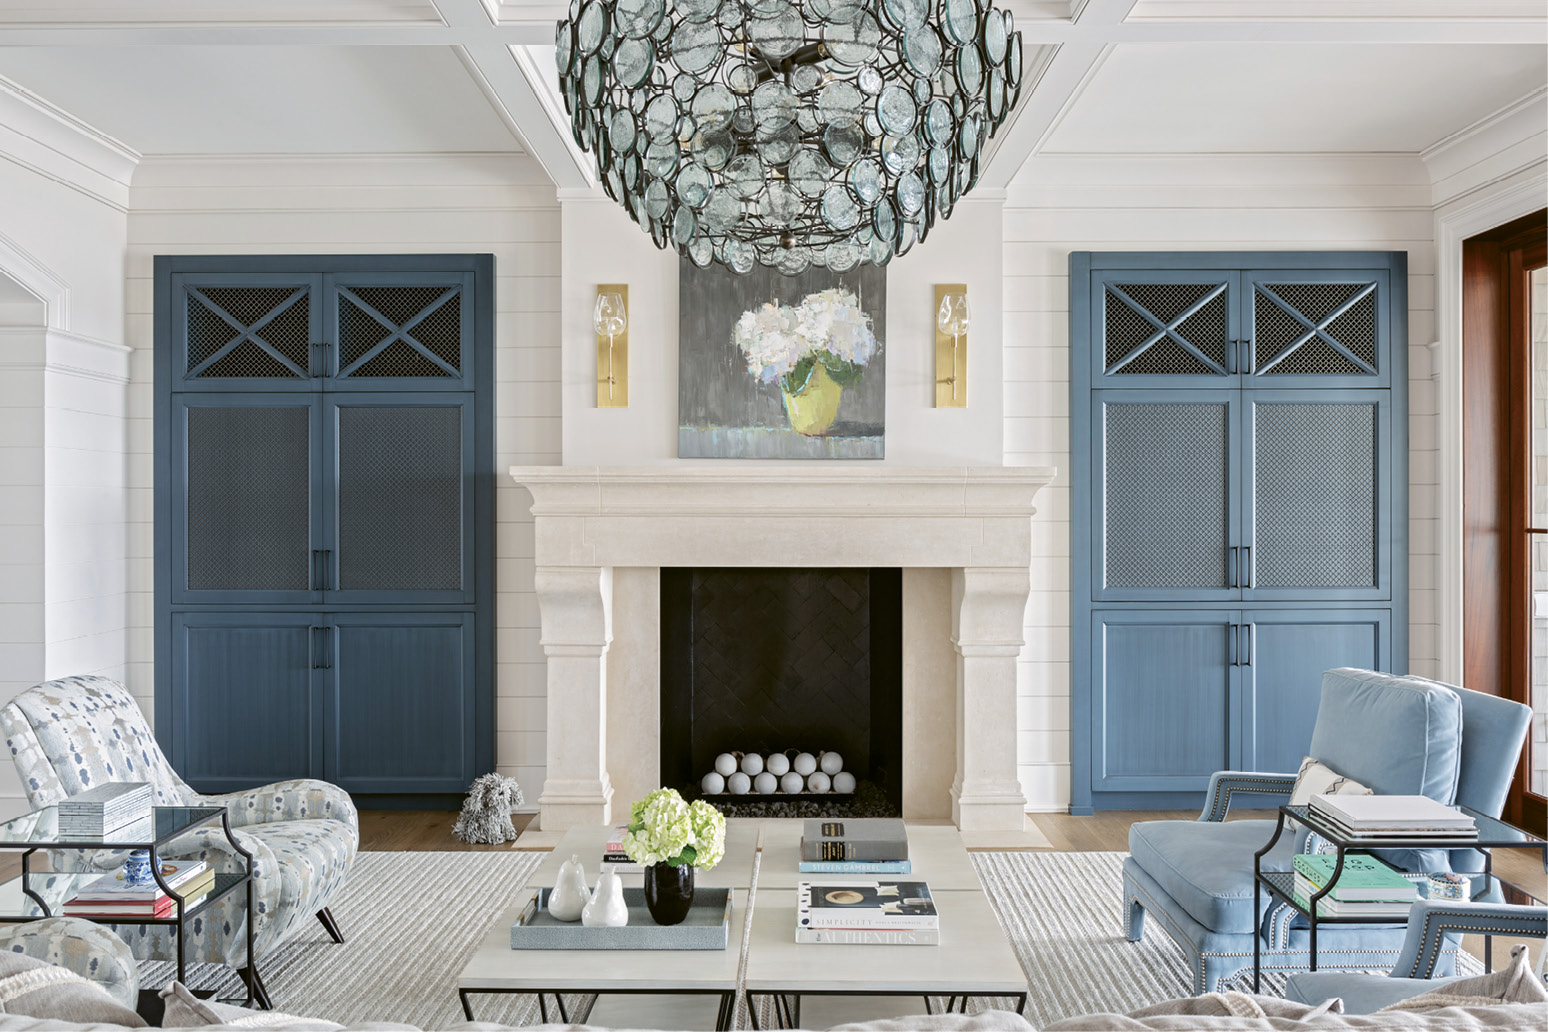 Hundreds of glass circles in the Currey and Company chandelier play with the ever-shifting light outside. A large oil painting by Barbara Flowers highlights the living room. The striking work of white hydrangeas captivated Suzie the moment she saw it in the window of Principle Gallery in Charleston.